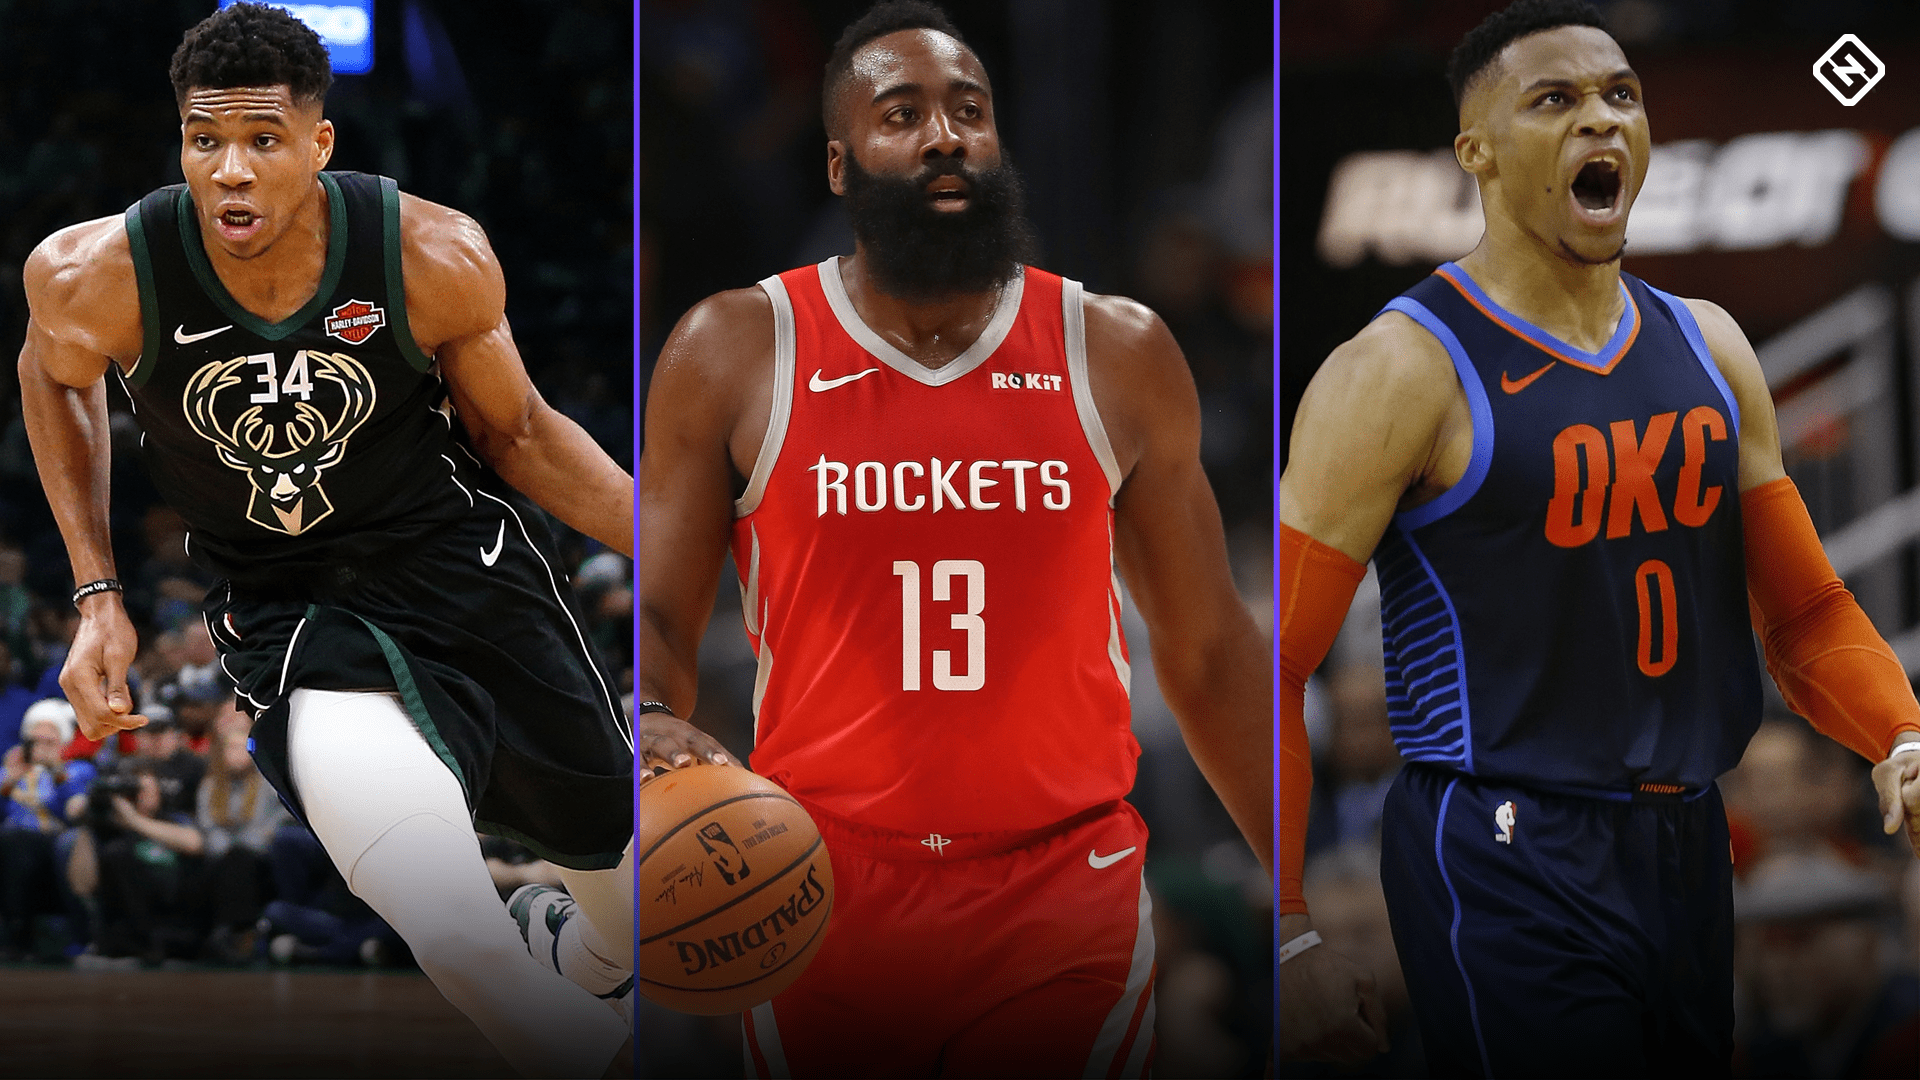 NBA All Star Game 2019: Date, Time, Rosters, TV Channel, Live Stream